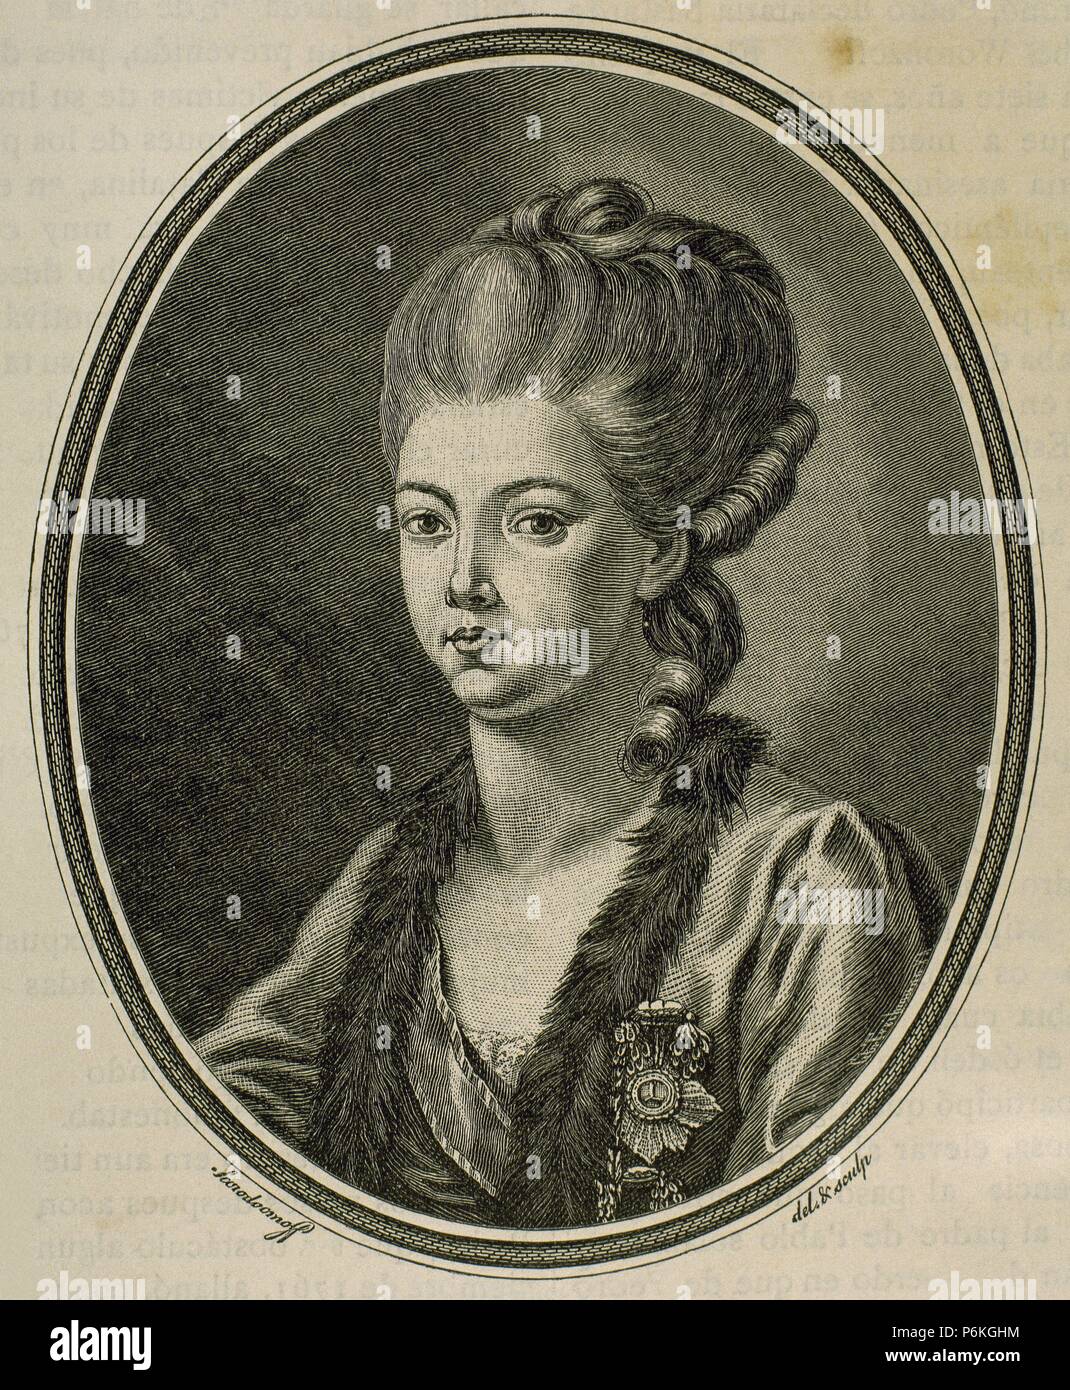 Princess Daschkaw (18th c.), lady of Honour to Catherine II of Russia. Portrait. Engraving by Treibmann, 1881. Stock Photo